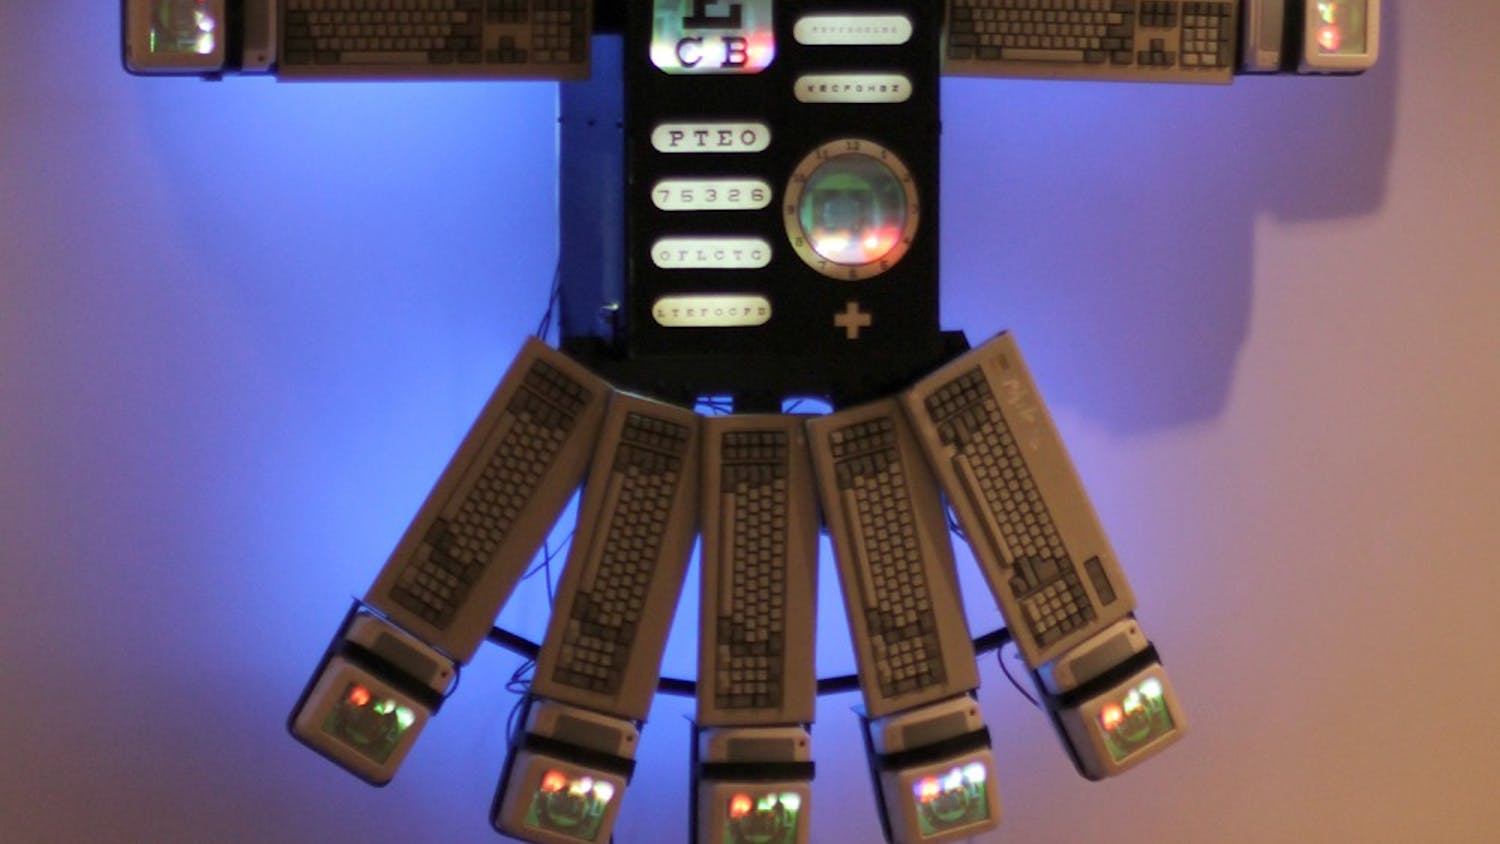 South Korean artist Nam June Paik’s piece “Eagle Eye” (pictured) is part of a show displayed in the Ackland for Geography 650.